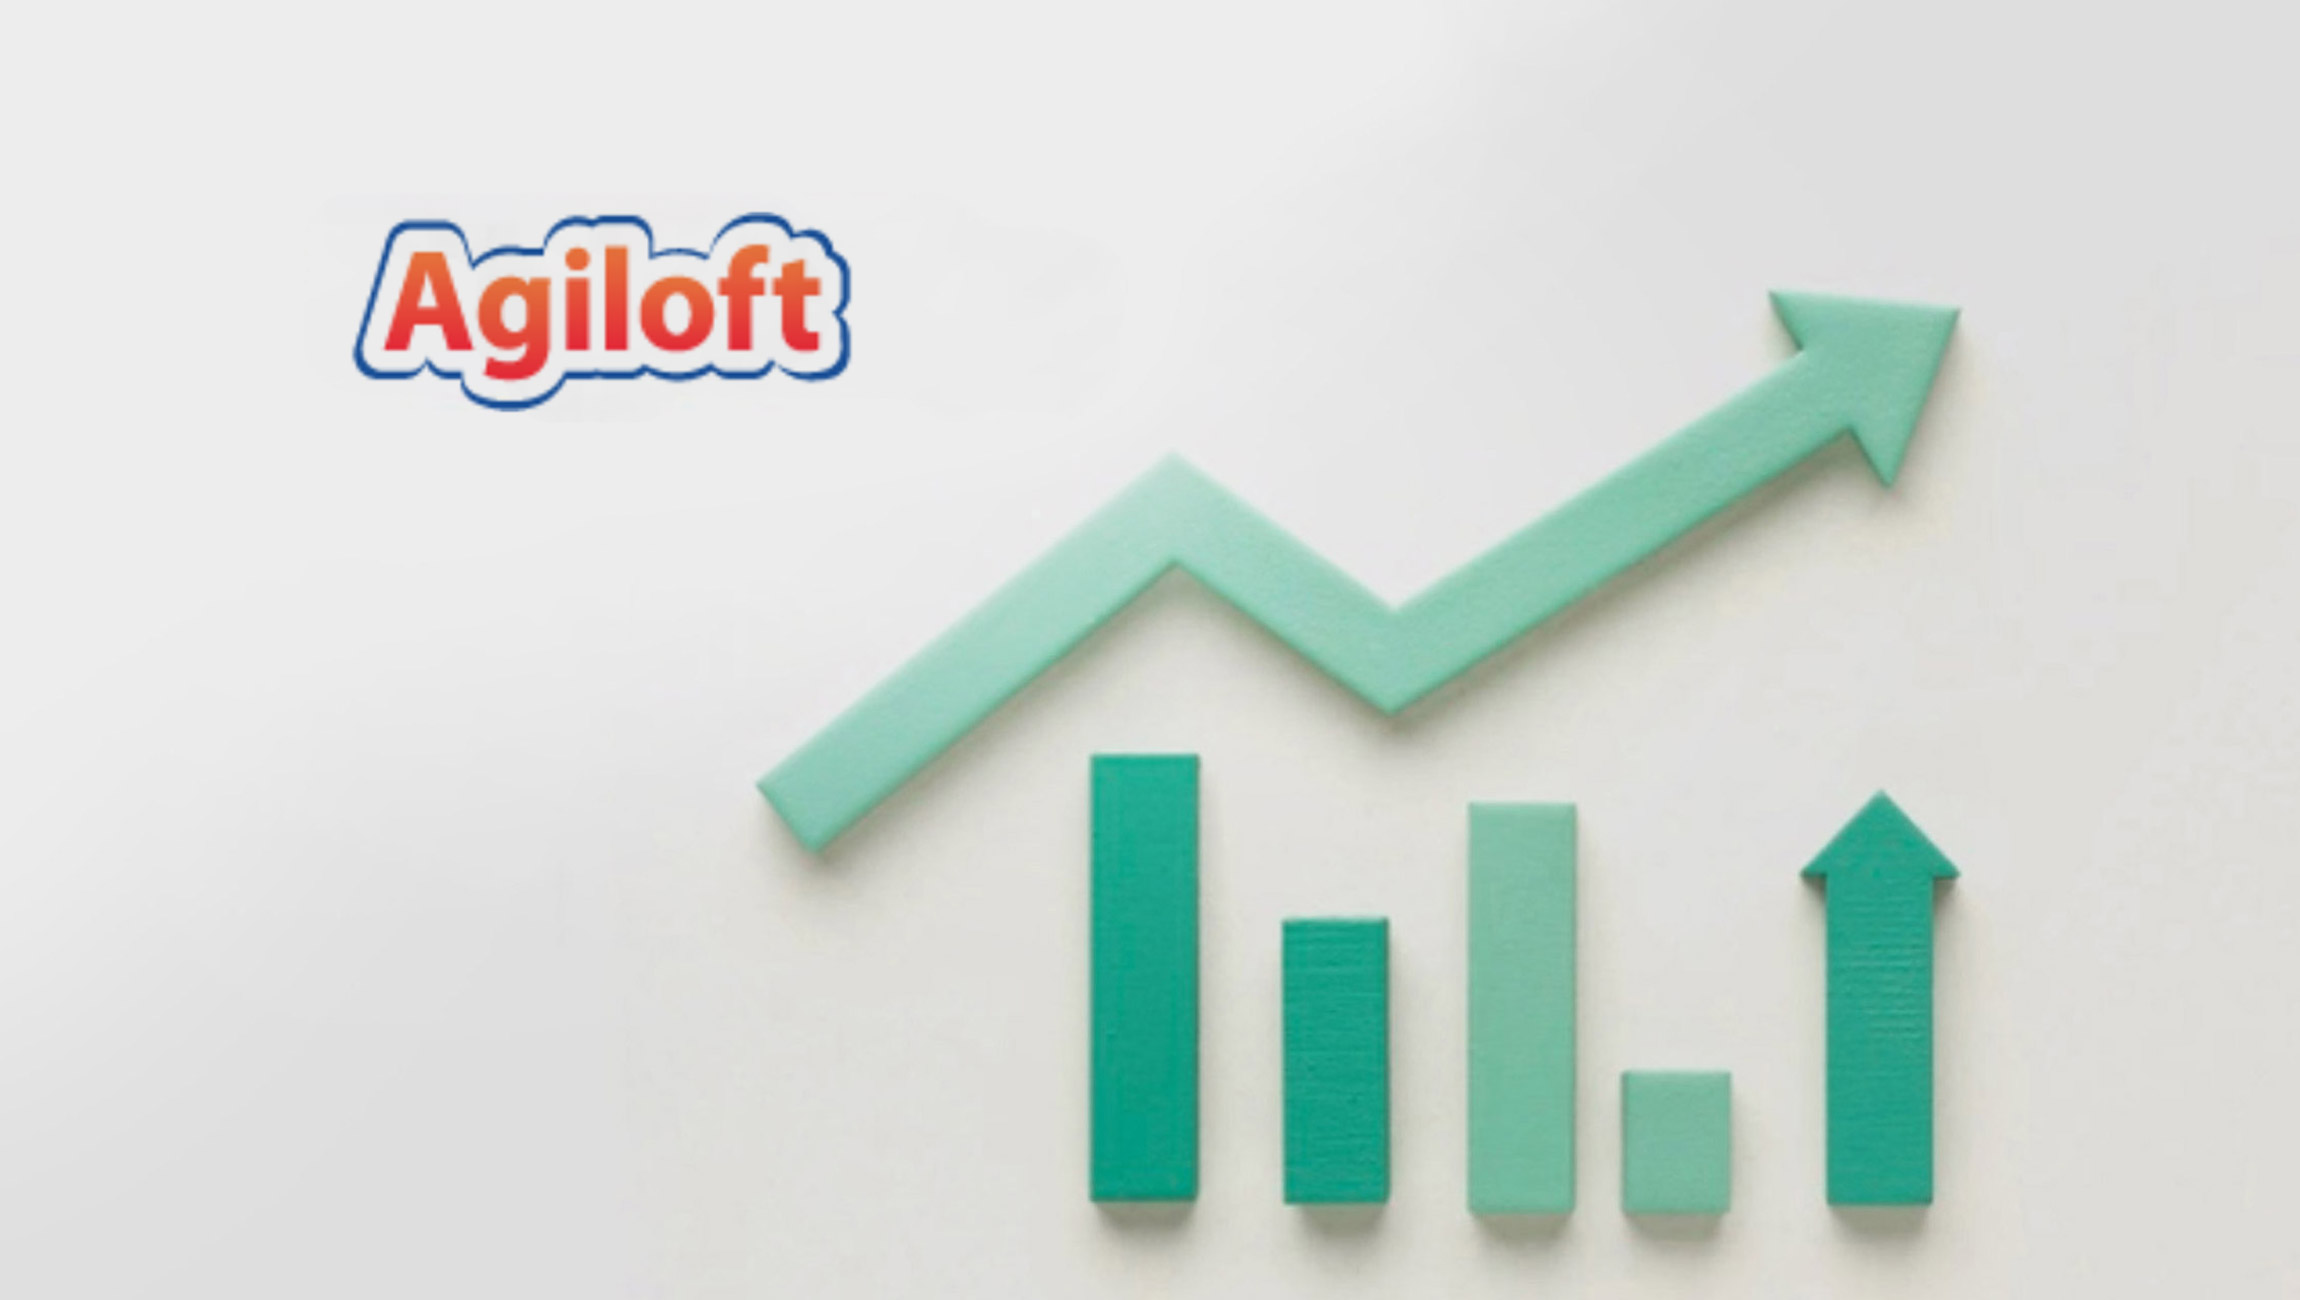 Agiloft Expands Leadership in Response to Rapid Company Growth and Increased Demand for Enterprise CLM Software